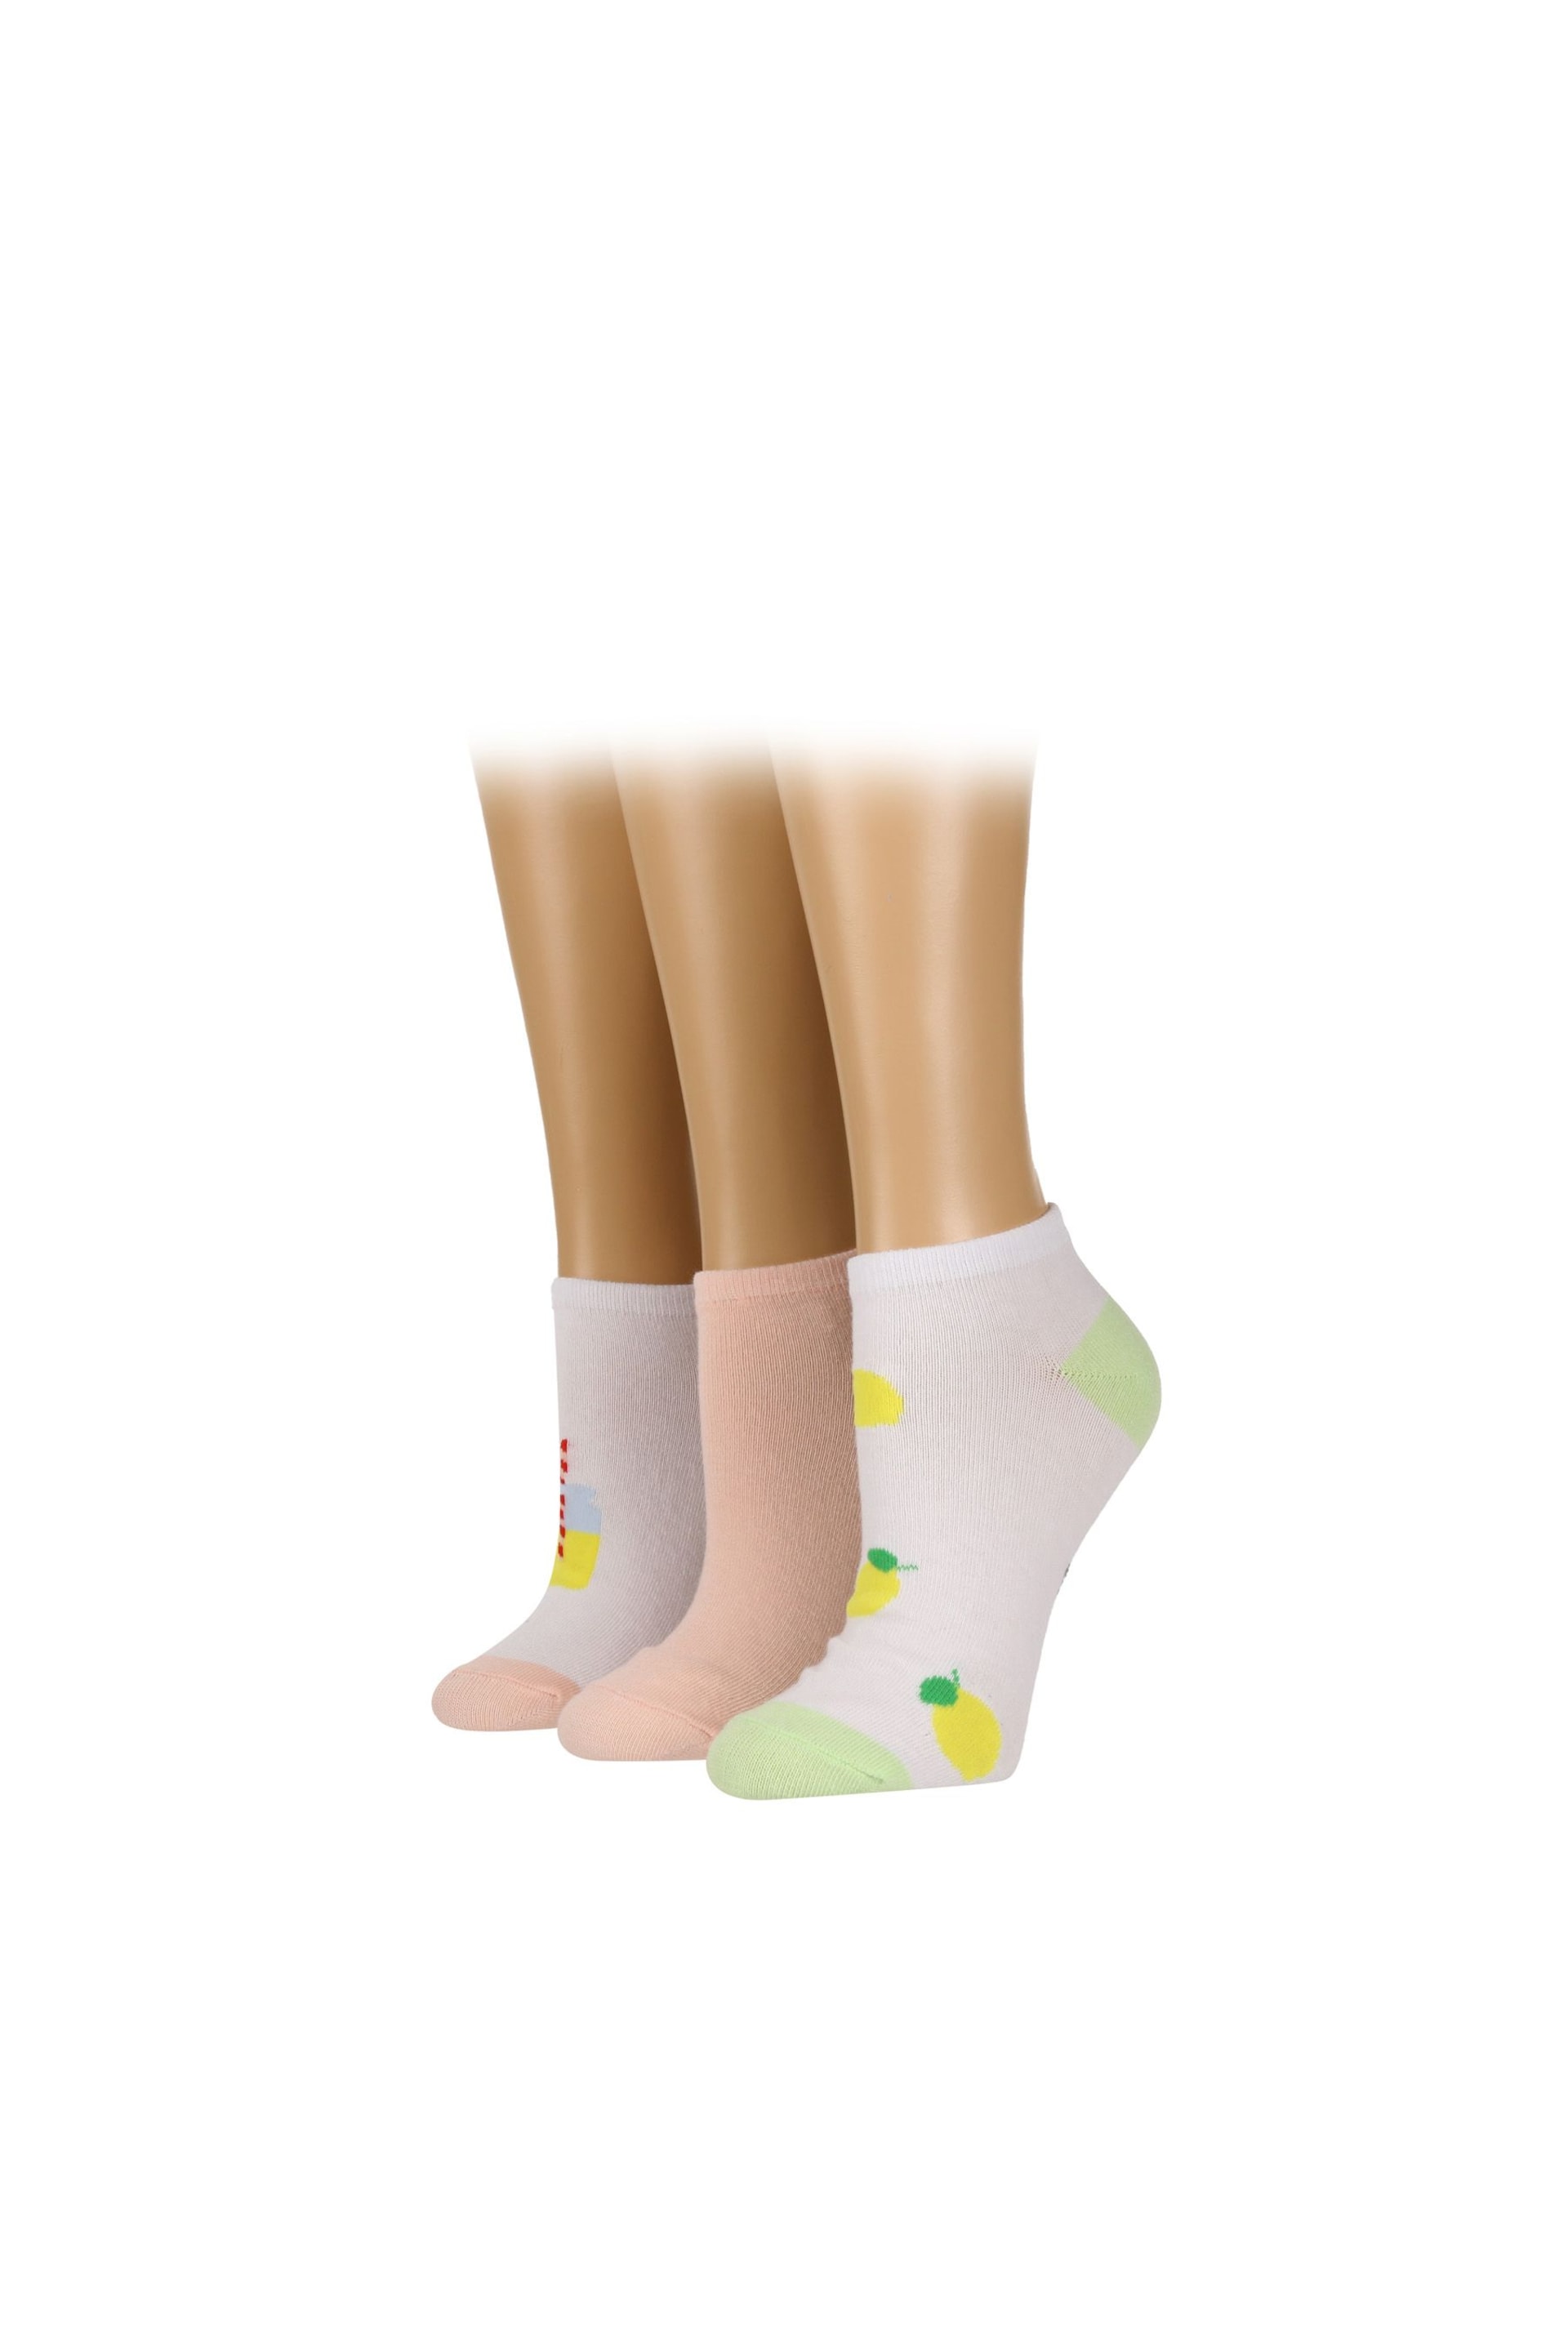 Wild Feet White When Life Give You Lemons No Show Trainer Socks 3 PK - Image 3 of 4